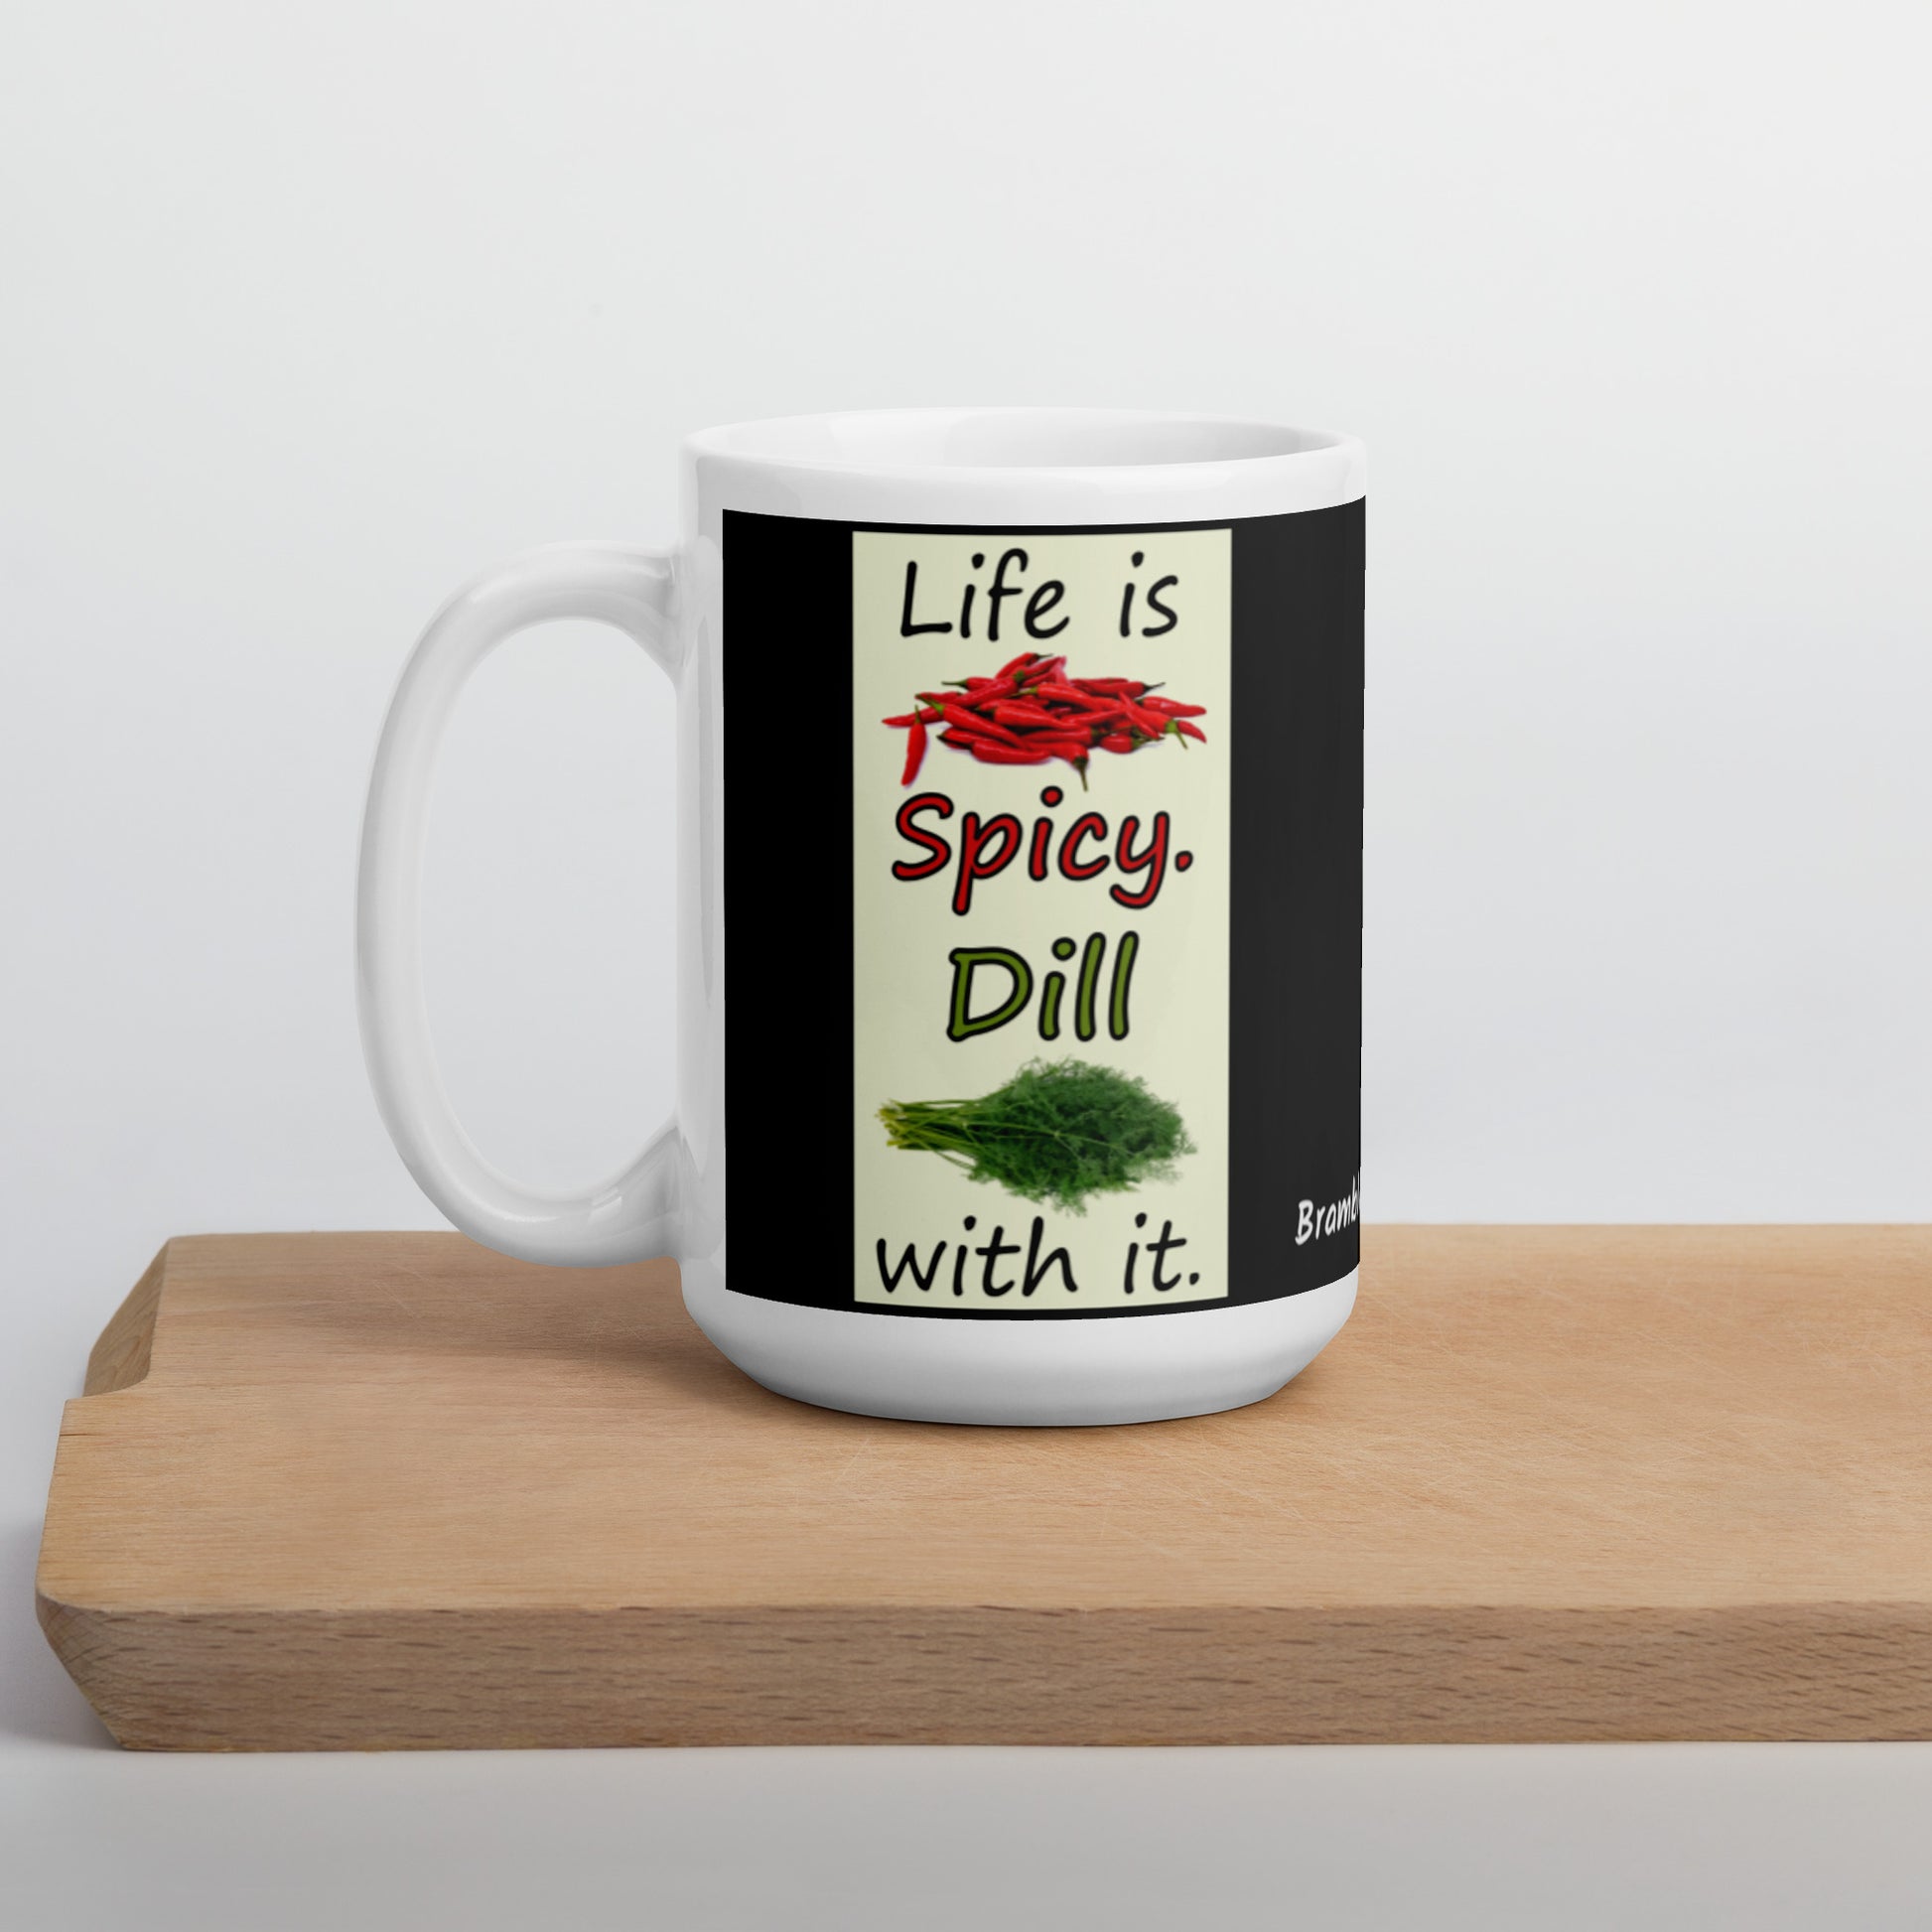 15 ounce white glossy ceramic mug. Life is Spicy. Dill with it text. Image of chili peppers and dill weed on a light yellow rectangle. Black background on mug. Shown on cutting board.